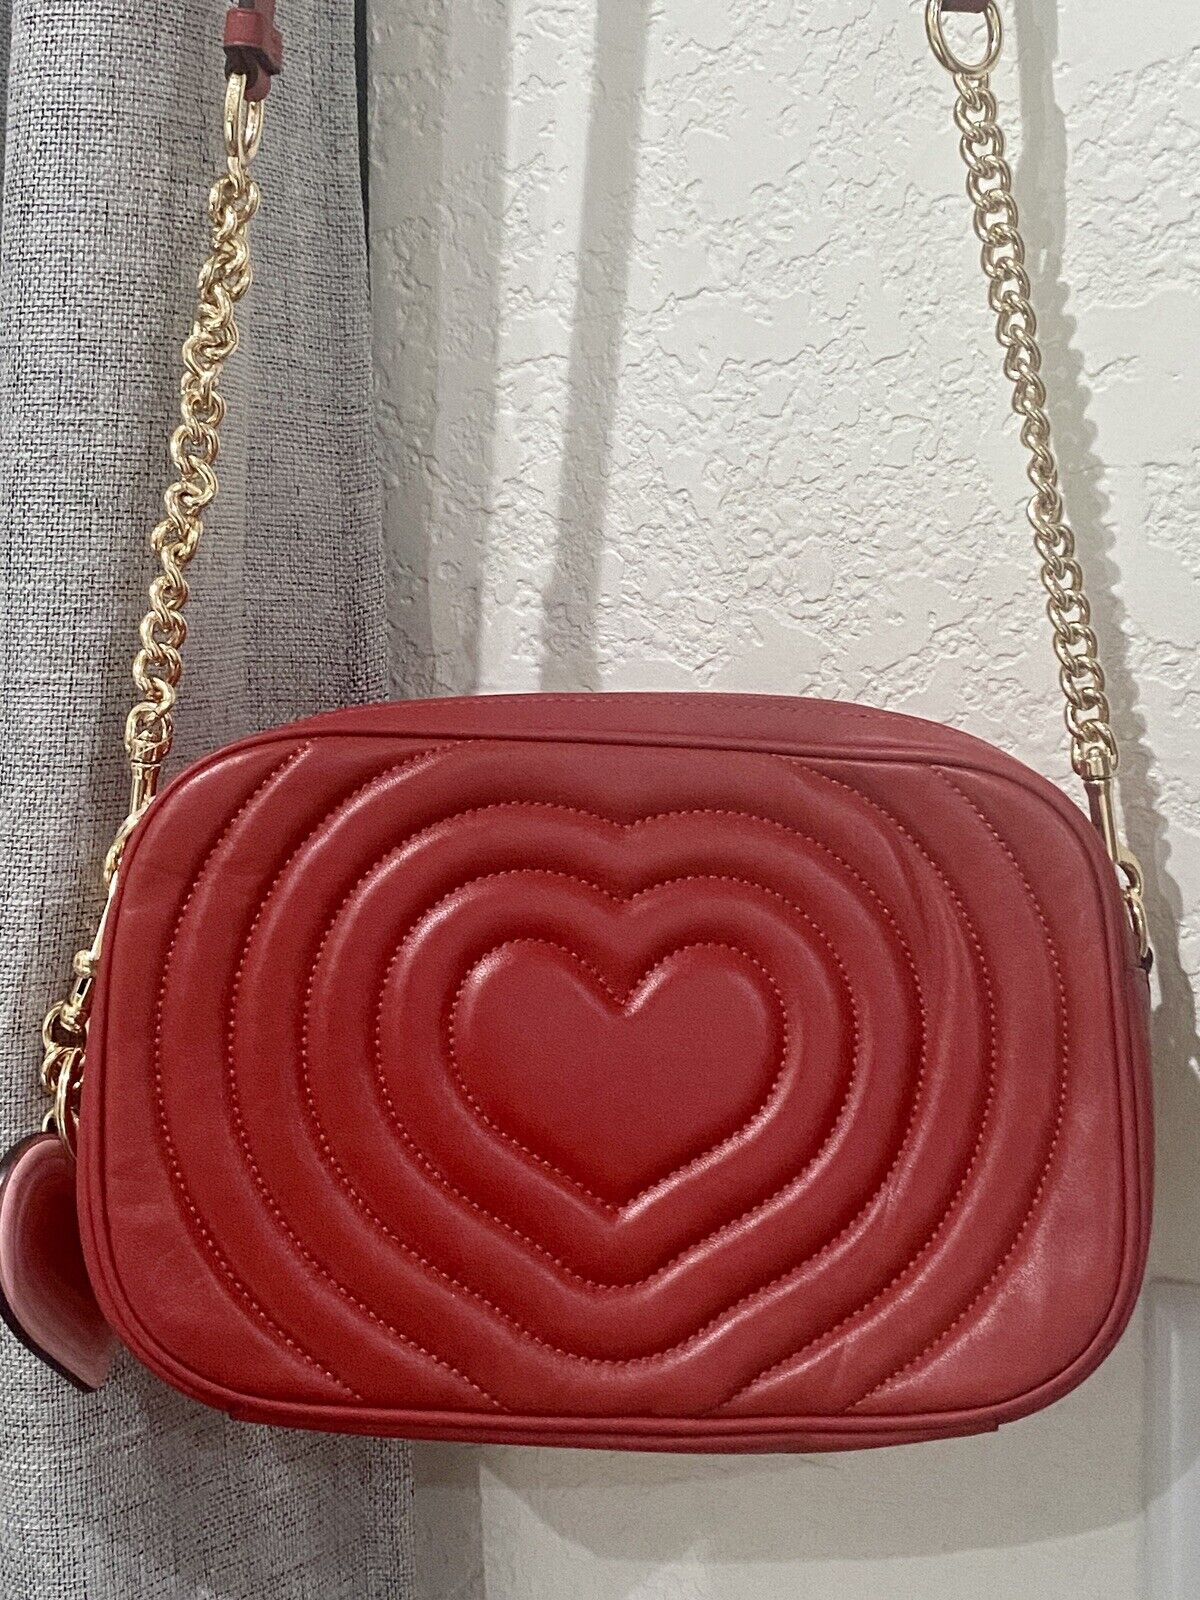 coach quilted heart bag